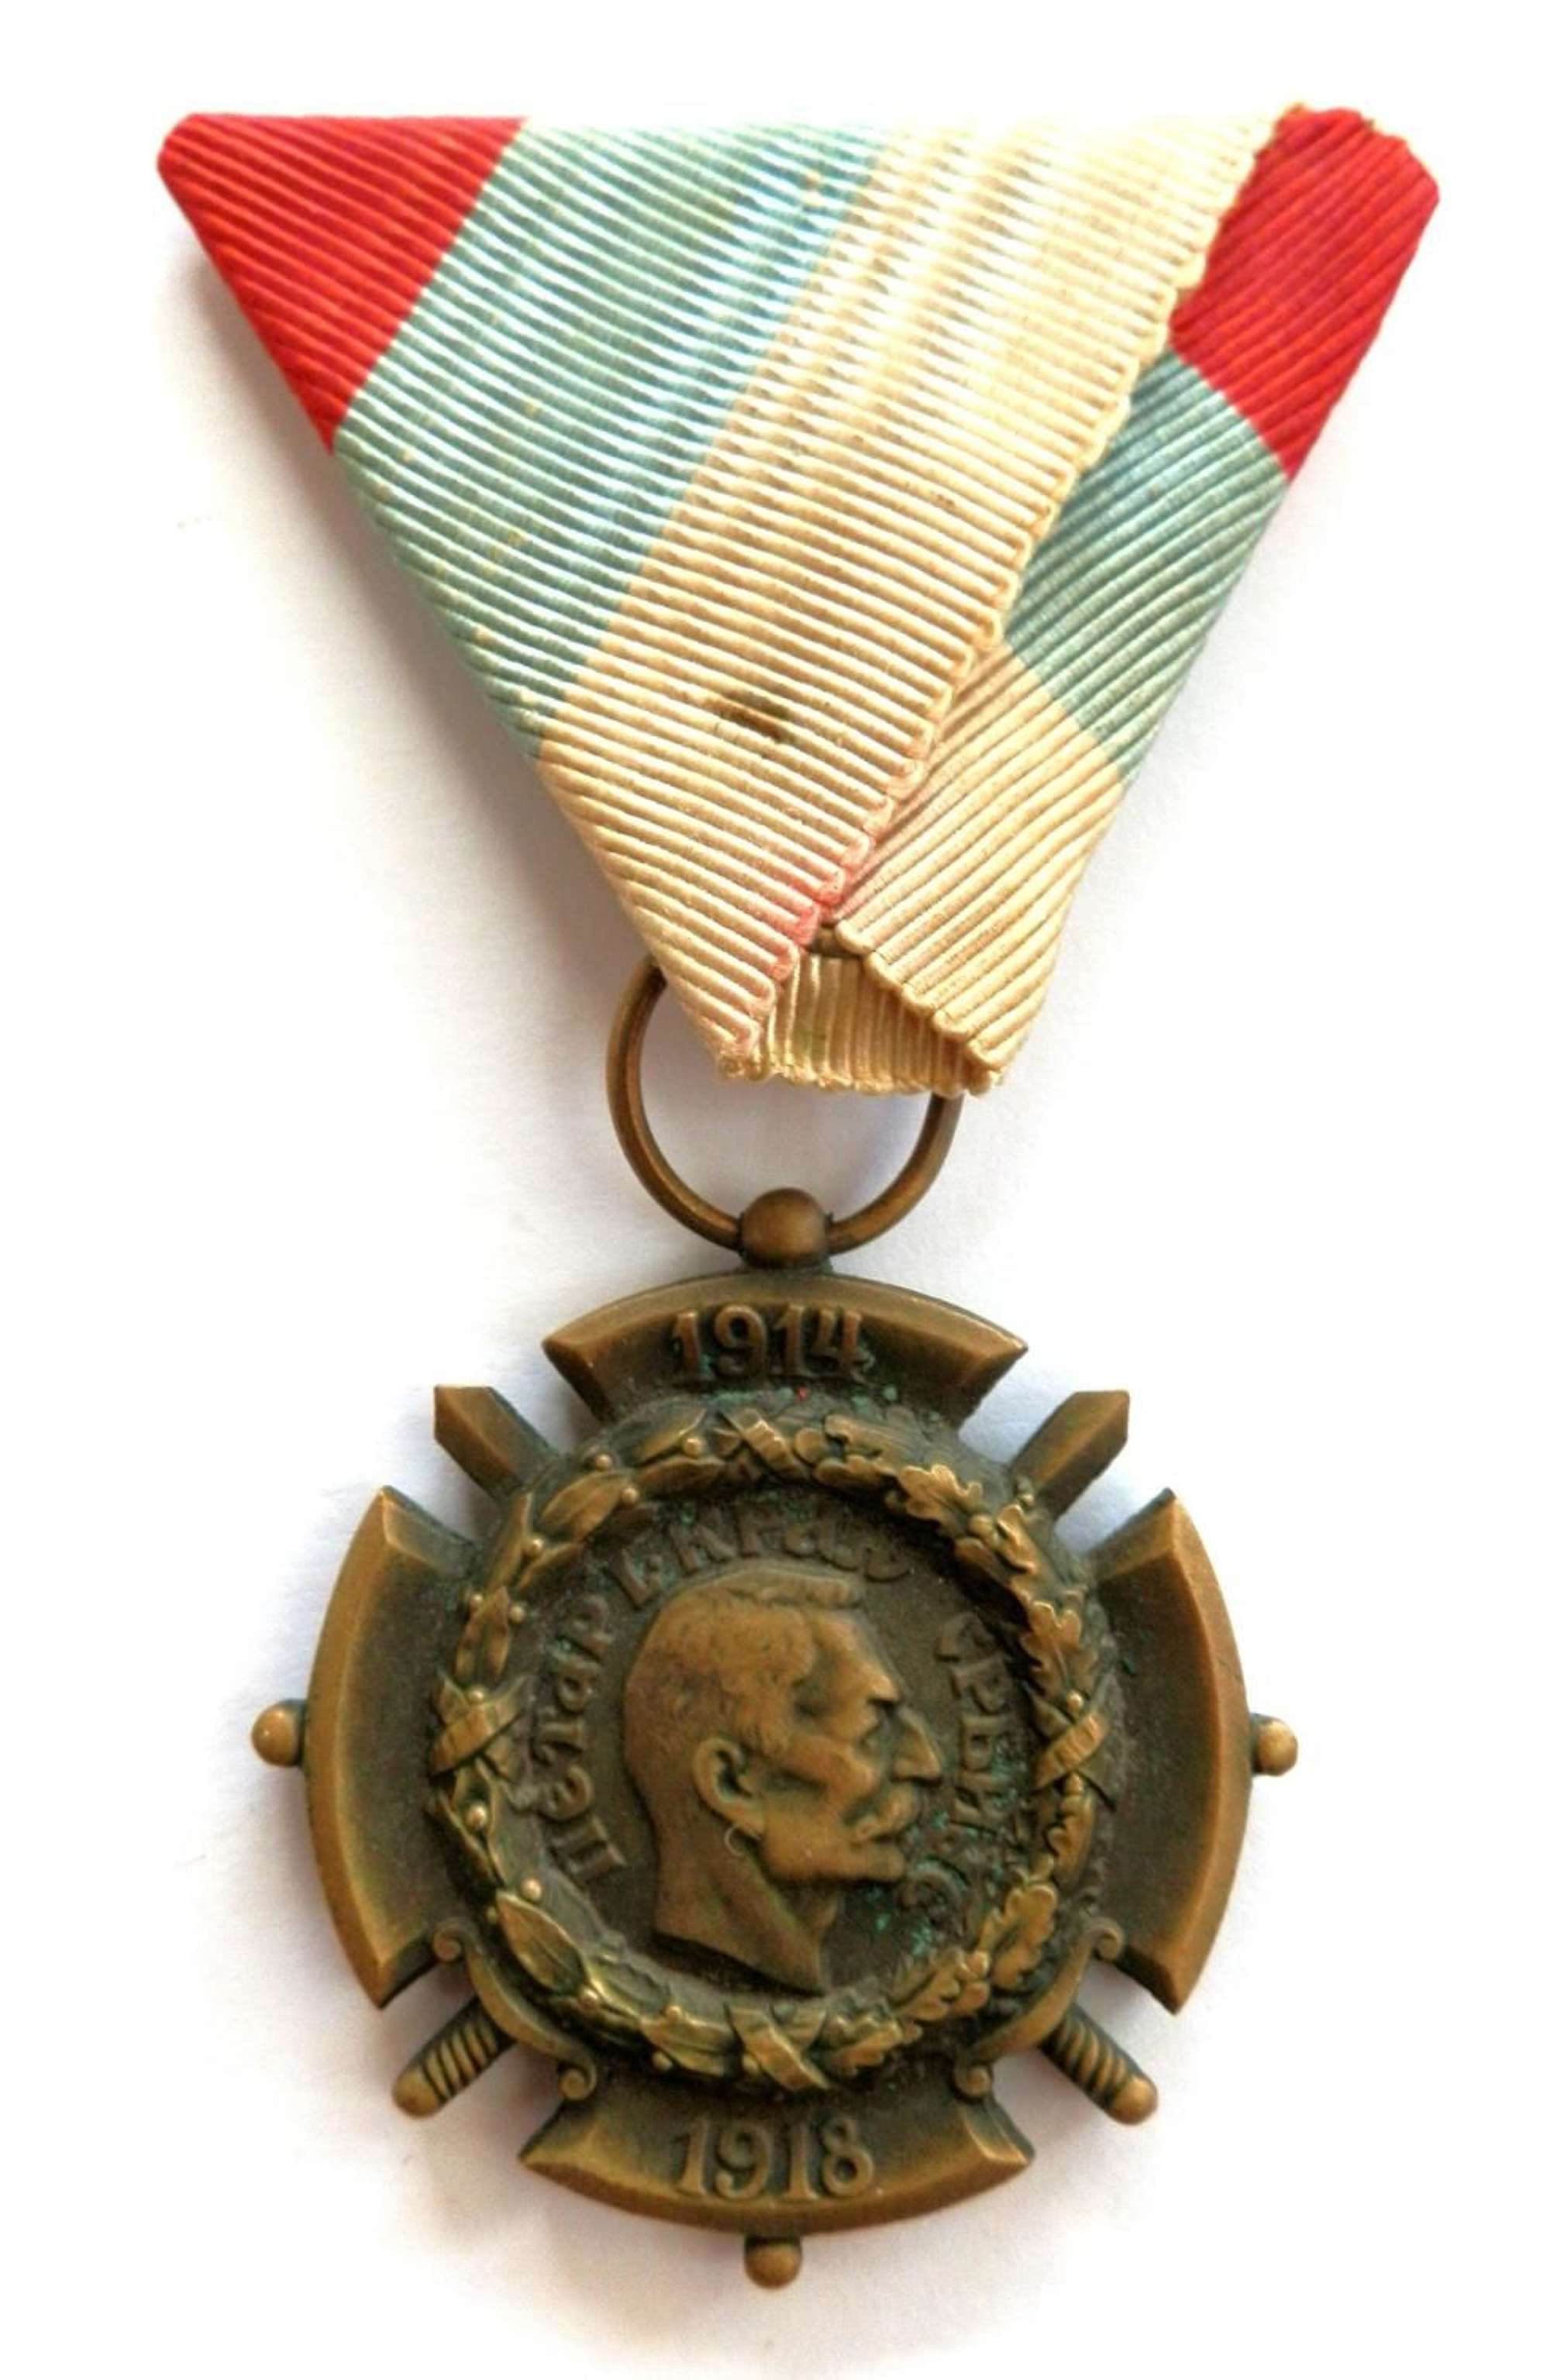 Serbian Commemorative Medal for WWI 1914-18.